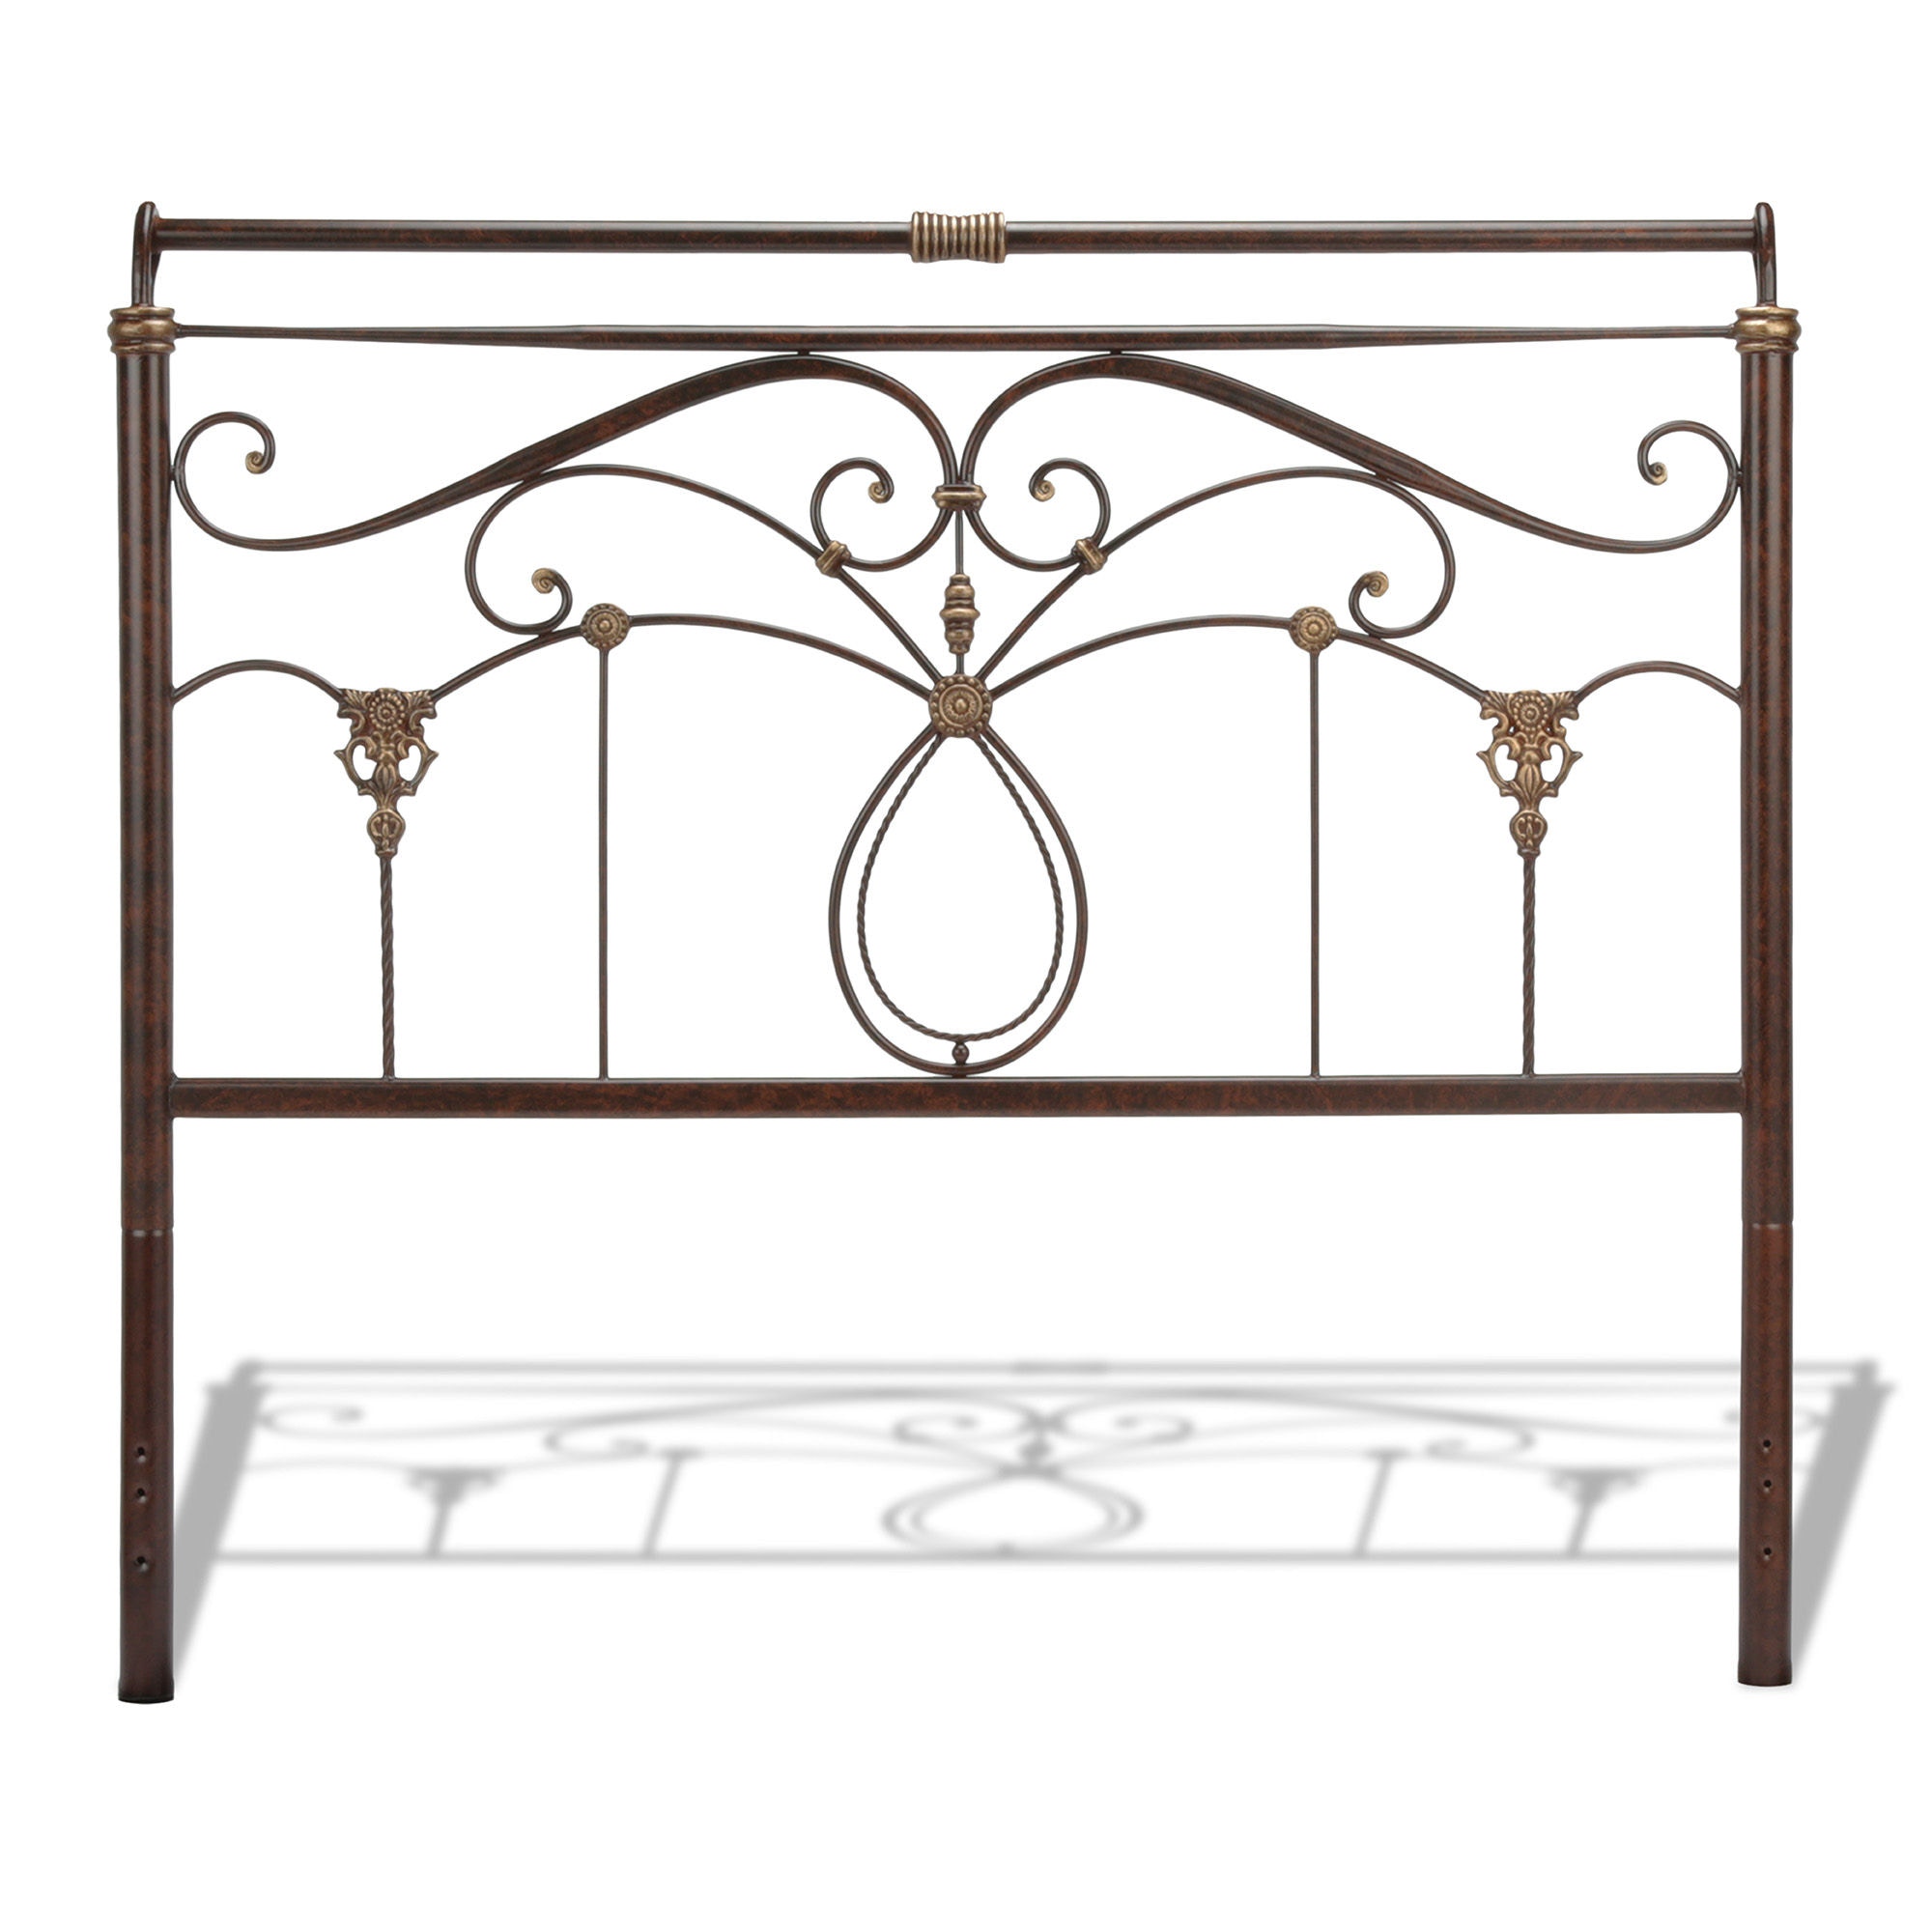 Marbled Russet Full Fashion Bed Group B12834 Lucinda Metal Headboard with Intricate Scrollwork and Sleighed Top Rail Panel